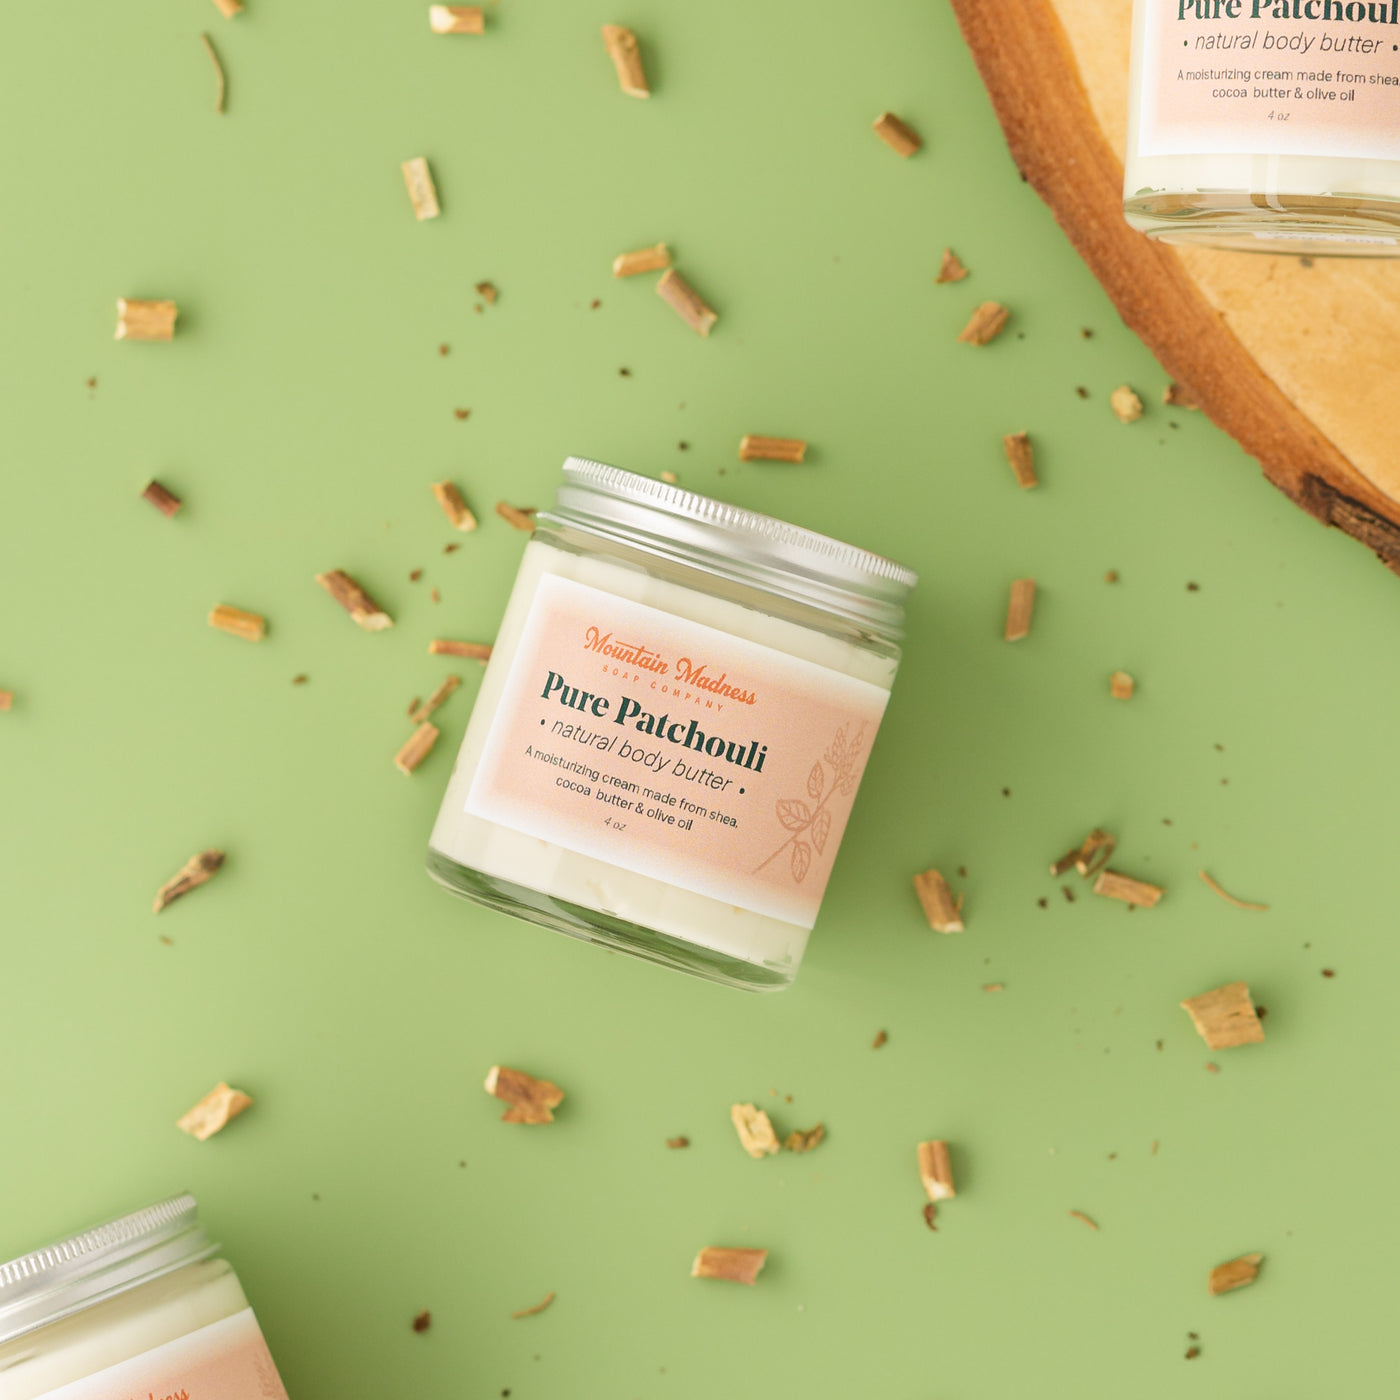 Pure Patchouli Body Butter